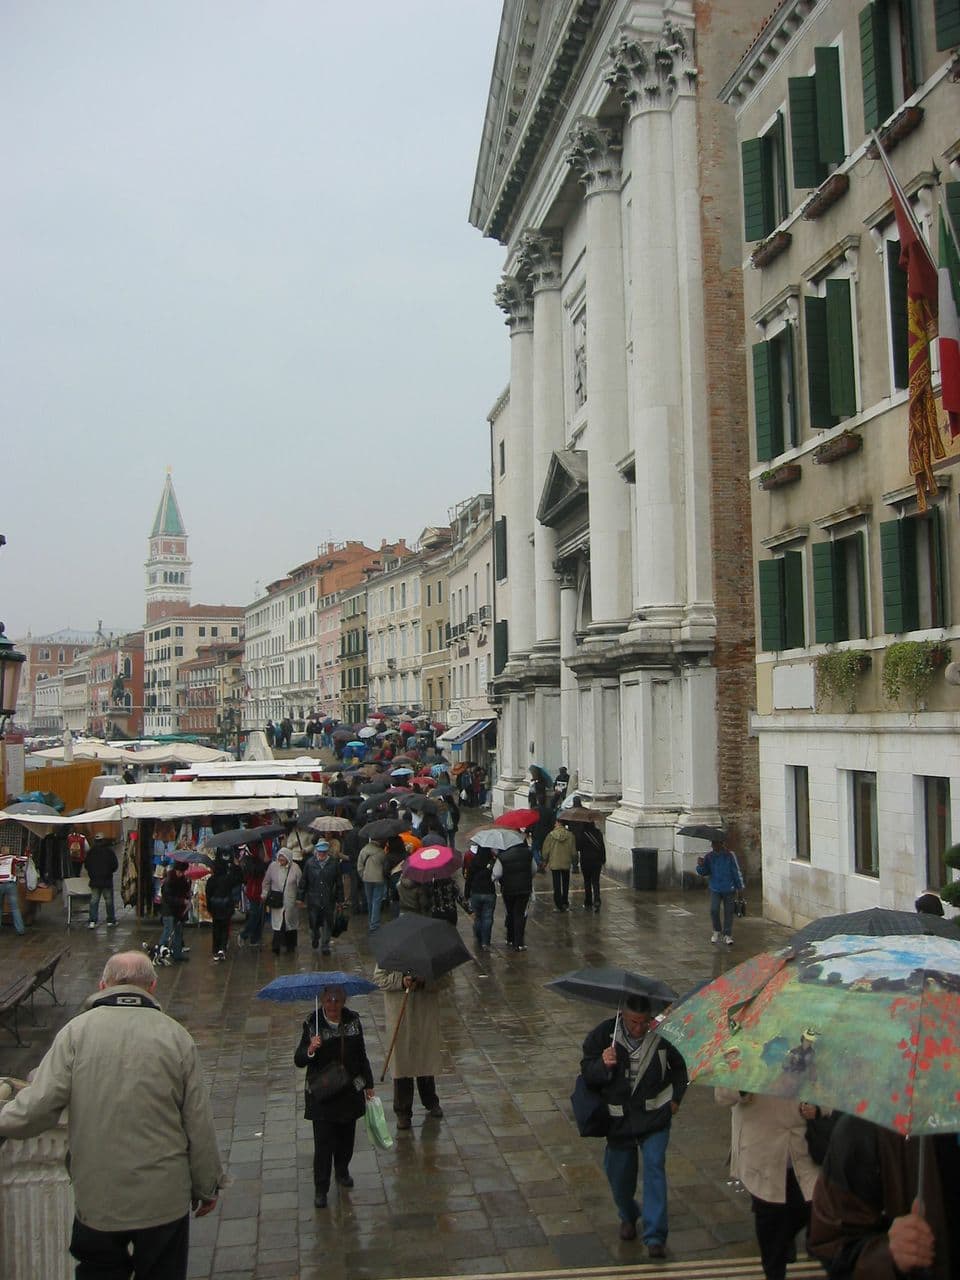 Tourists and locals braving the rain in Venice. (Courtesy Sonia Michaels)